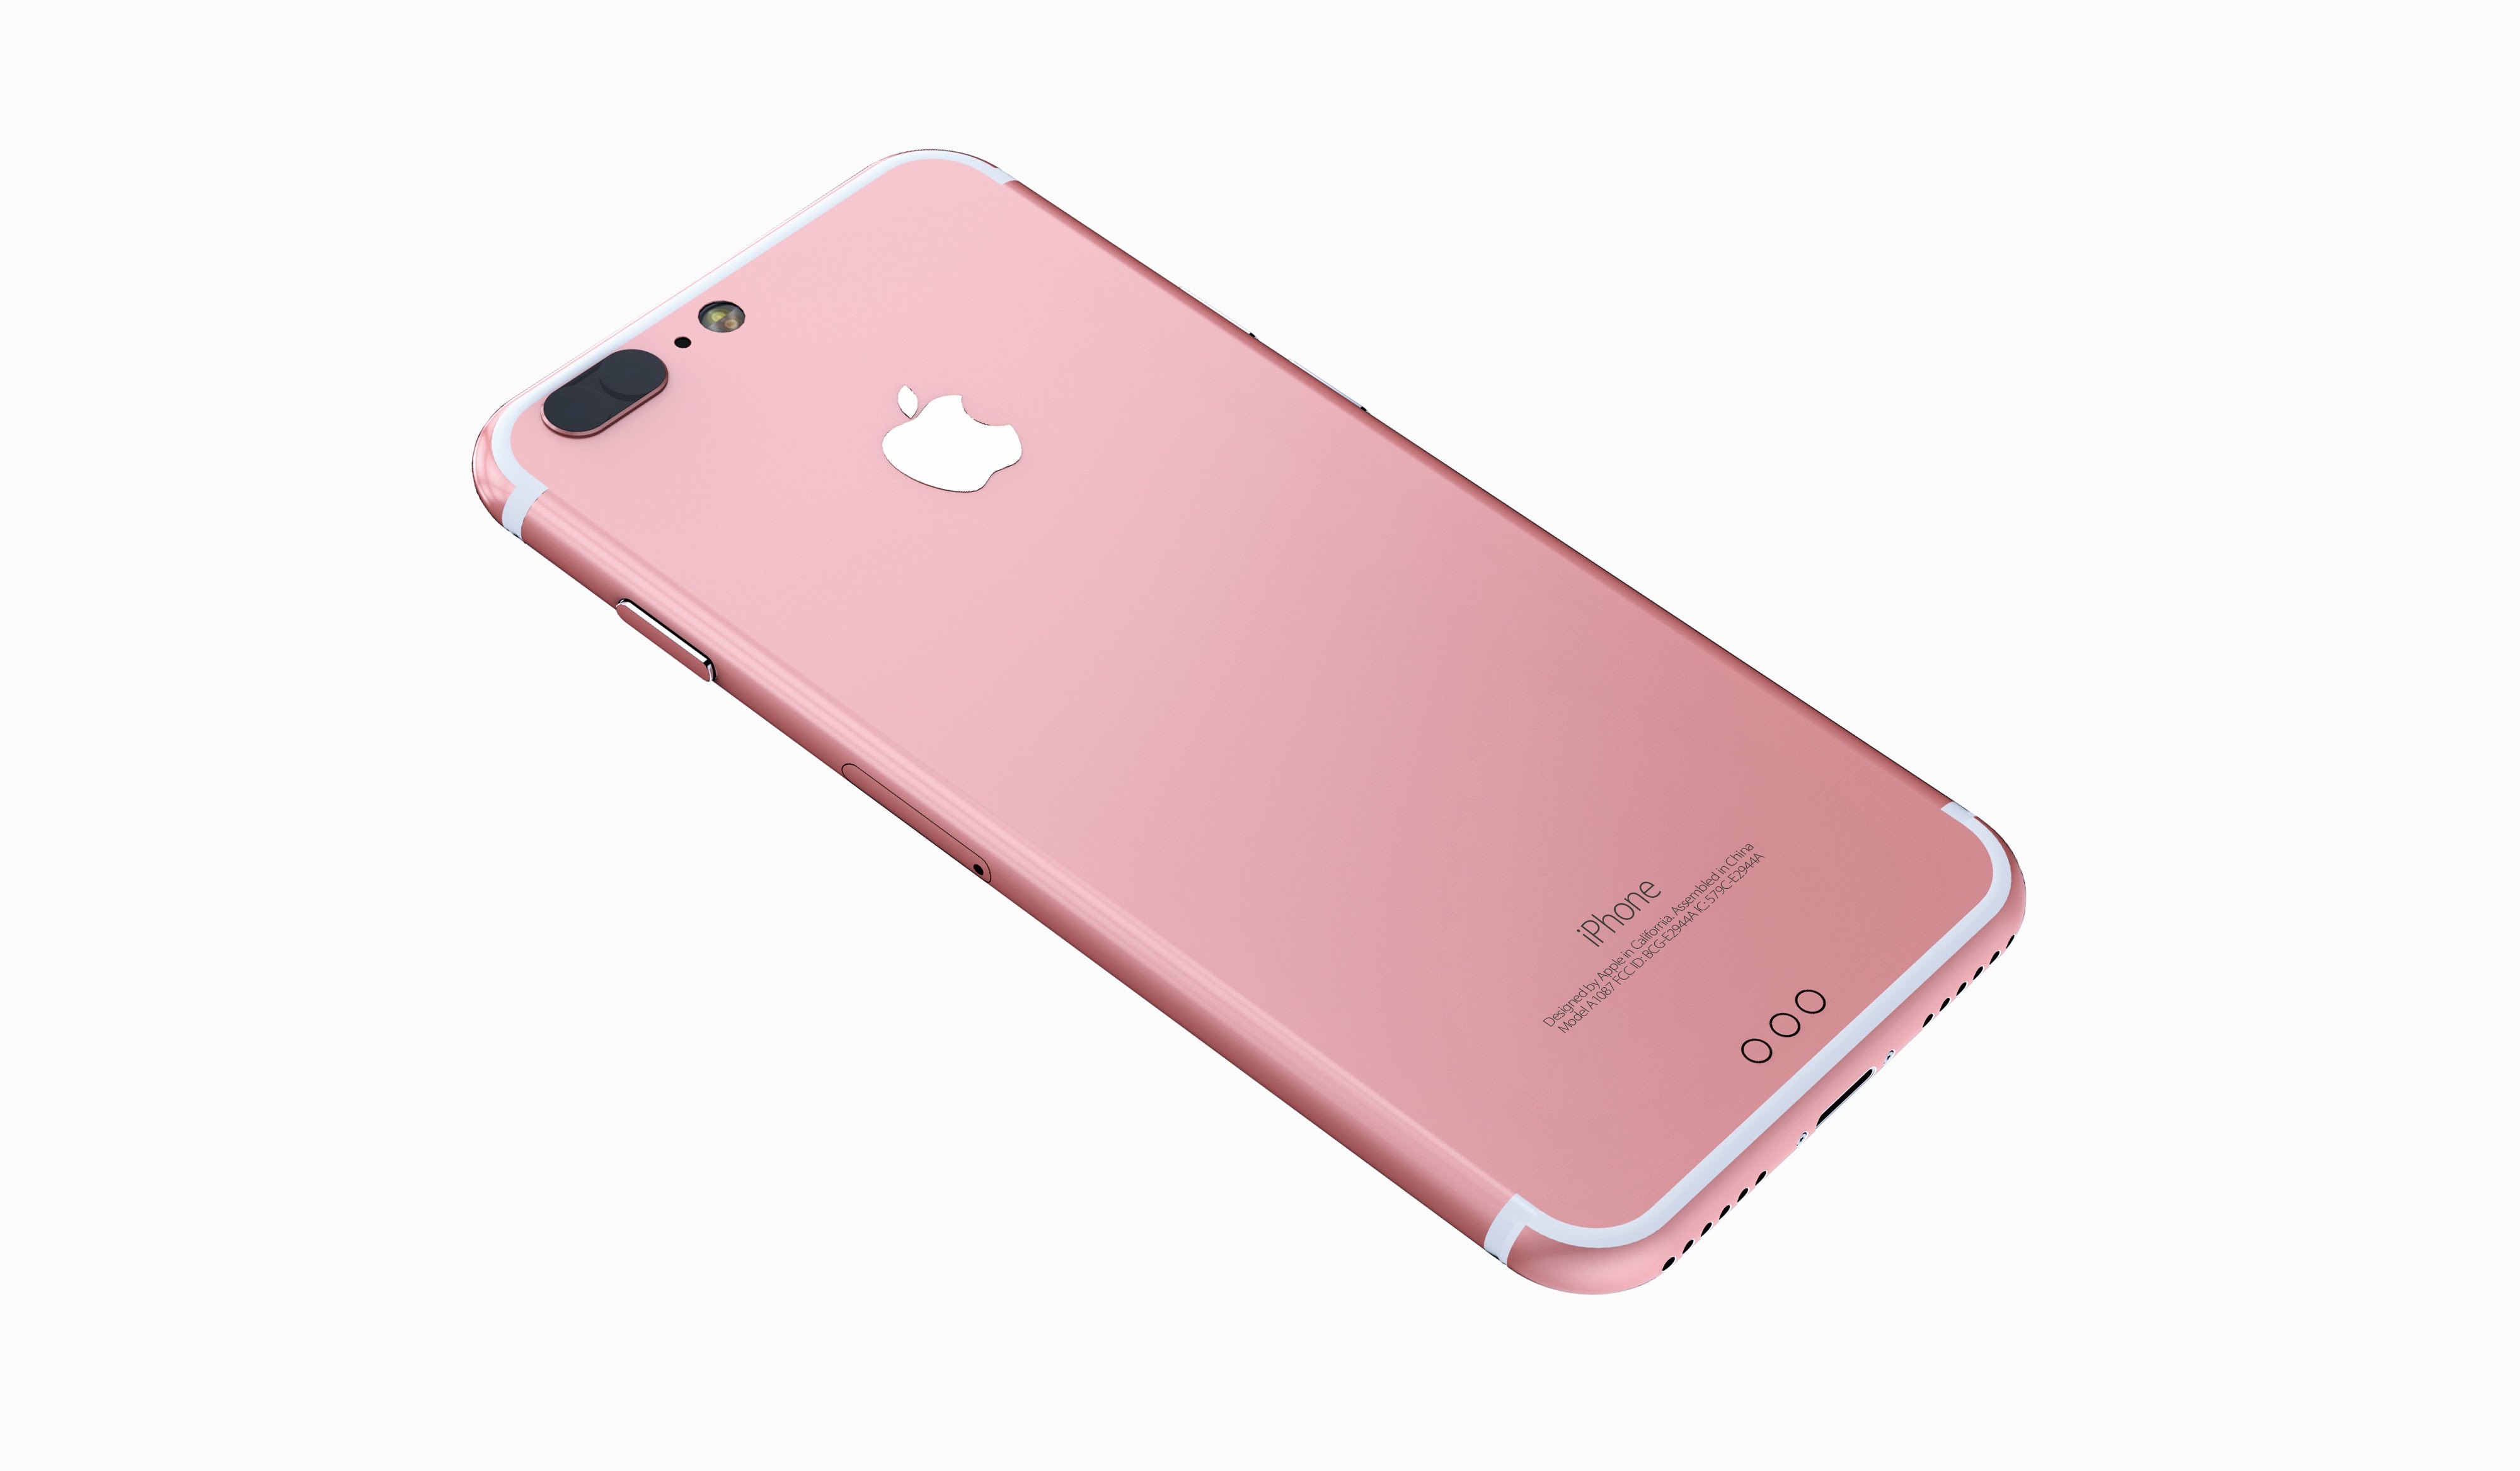 Iphone 7 Rose Gold Back Panel Leaked Report Claims Same Price For Base Model Superphen S Tech Blog